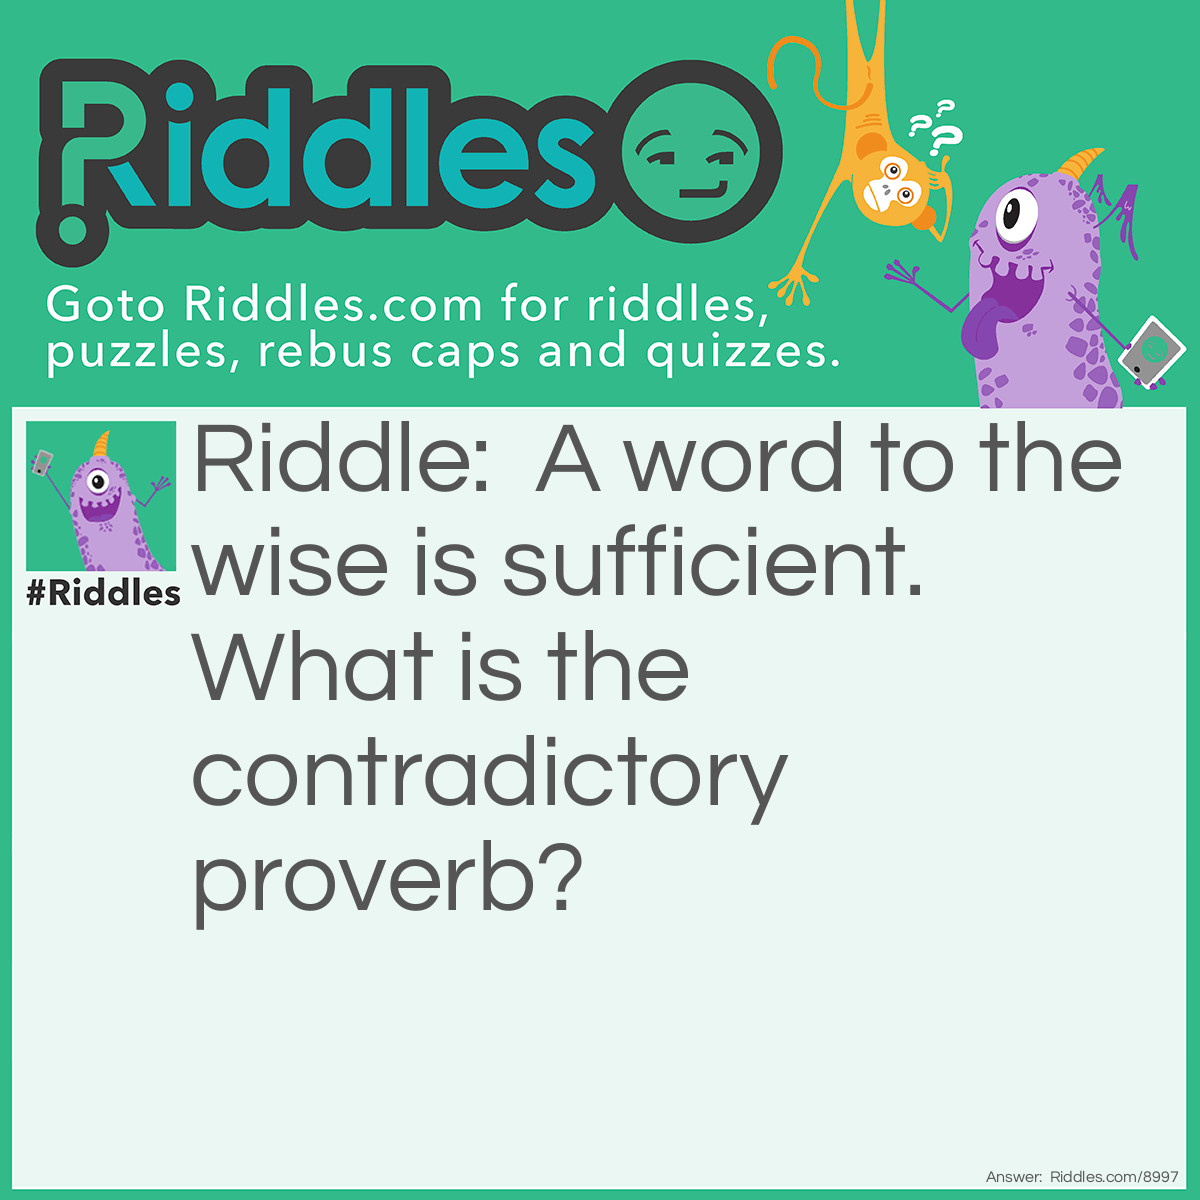 Riddle: A word to the wise is sufficient. What is the contradictory proverb? Answer: Talk is cheap.